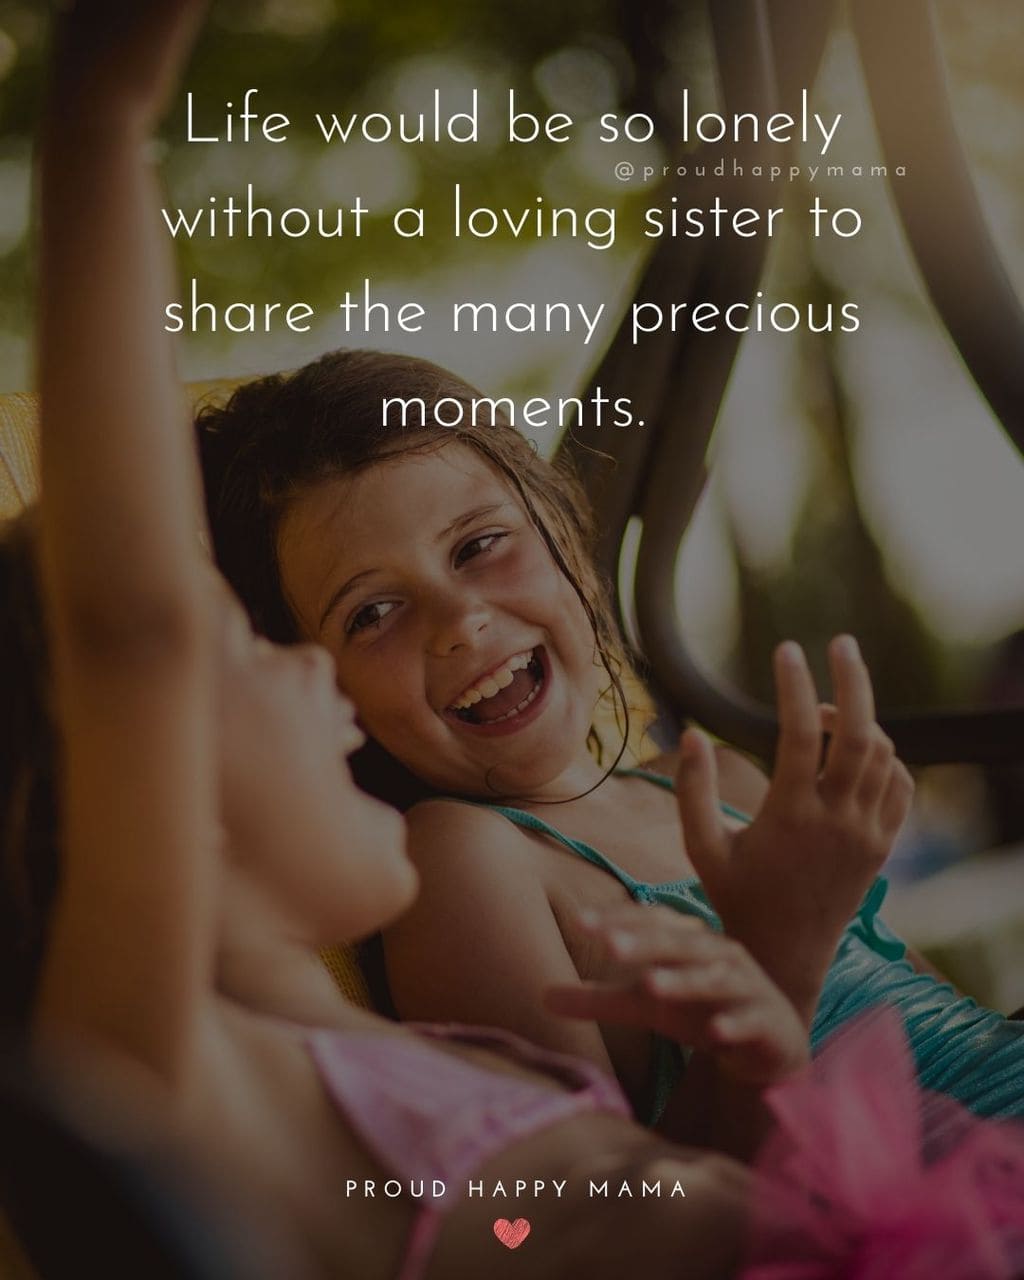 Sister Quotes - Life would be so lonely without a loving sister to share the many precious moments.